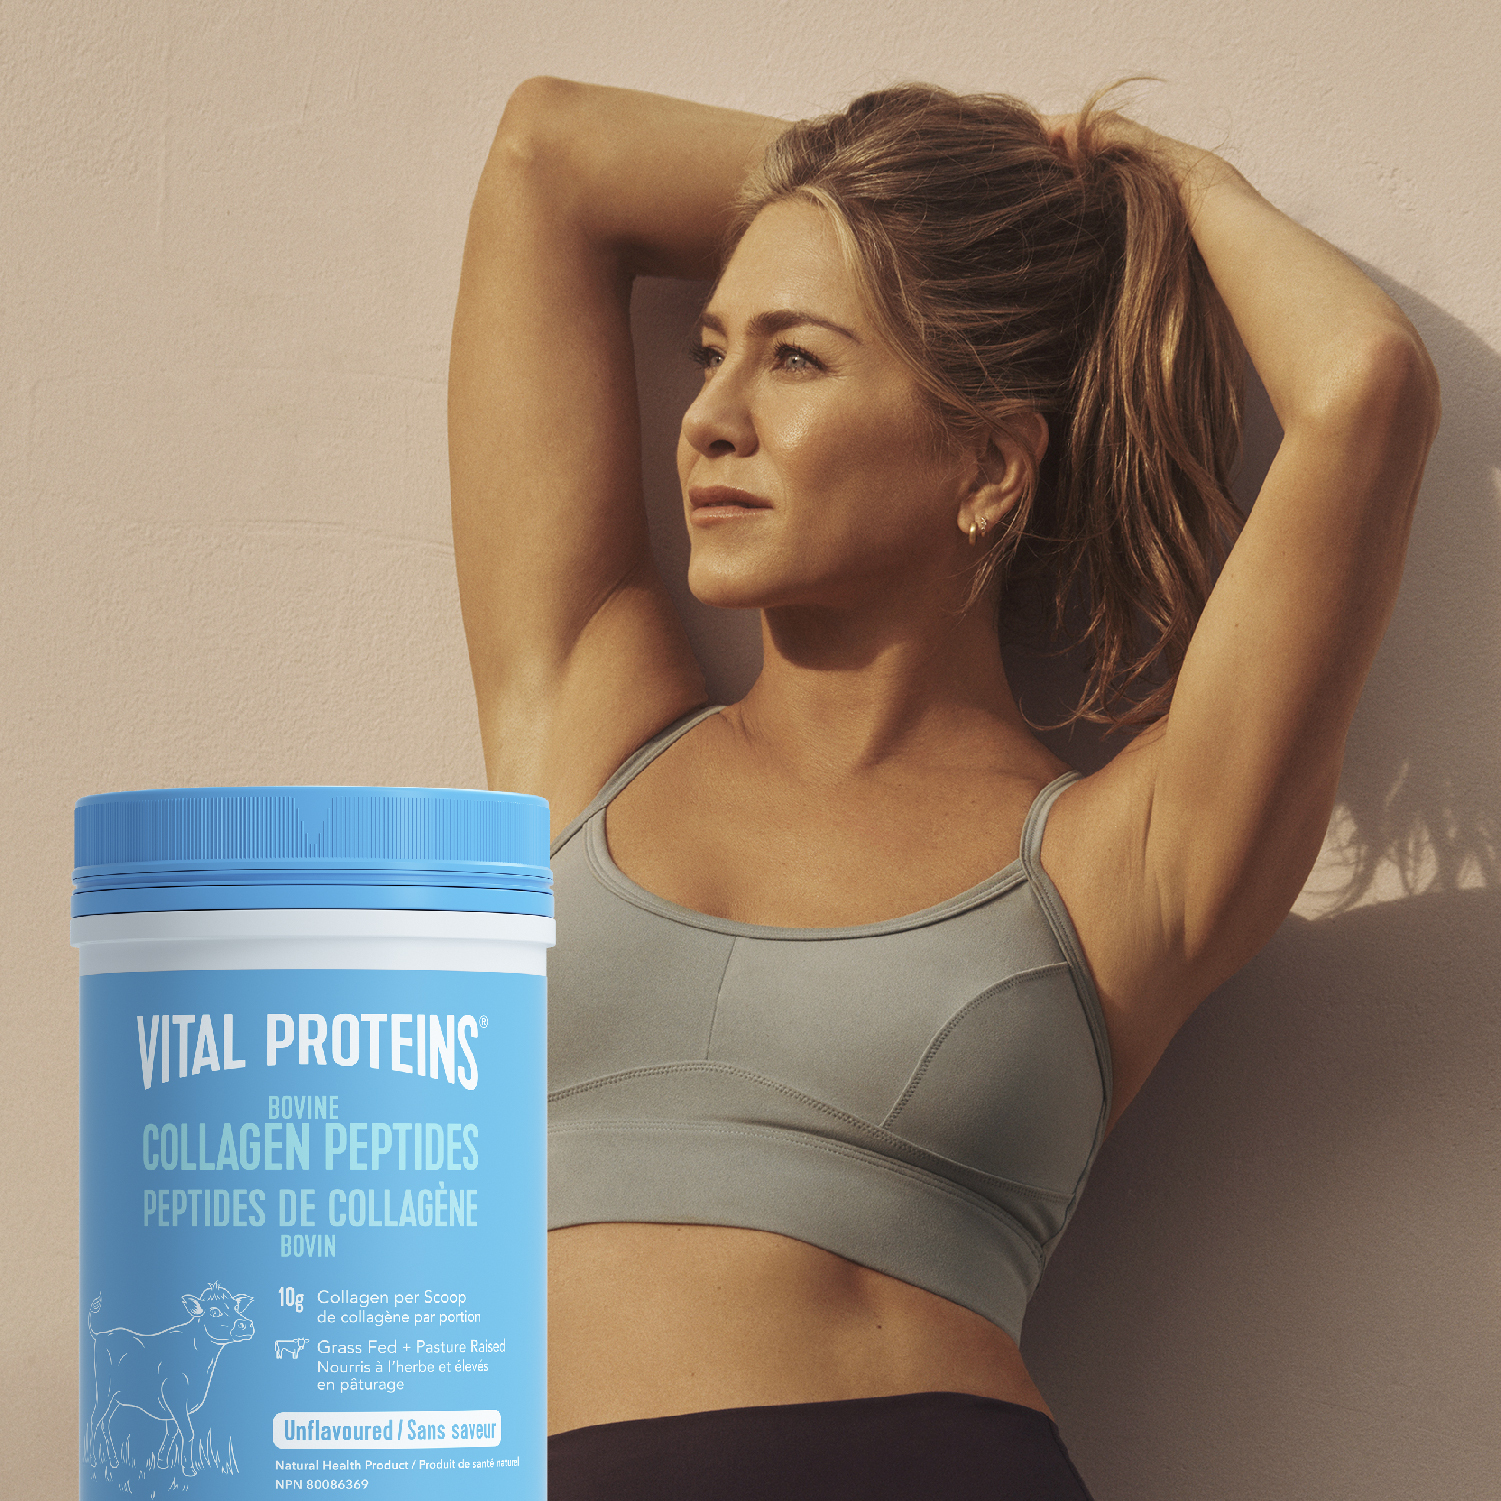 Jennifer Anisten and Vital Proteins Product